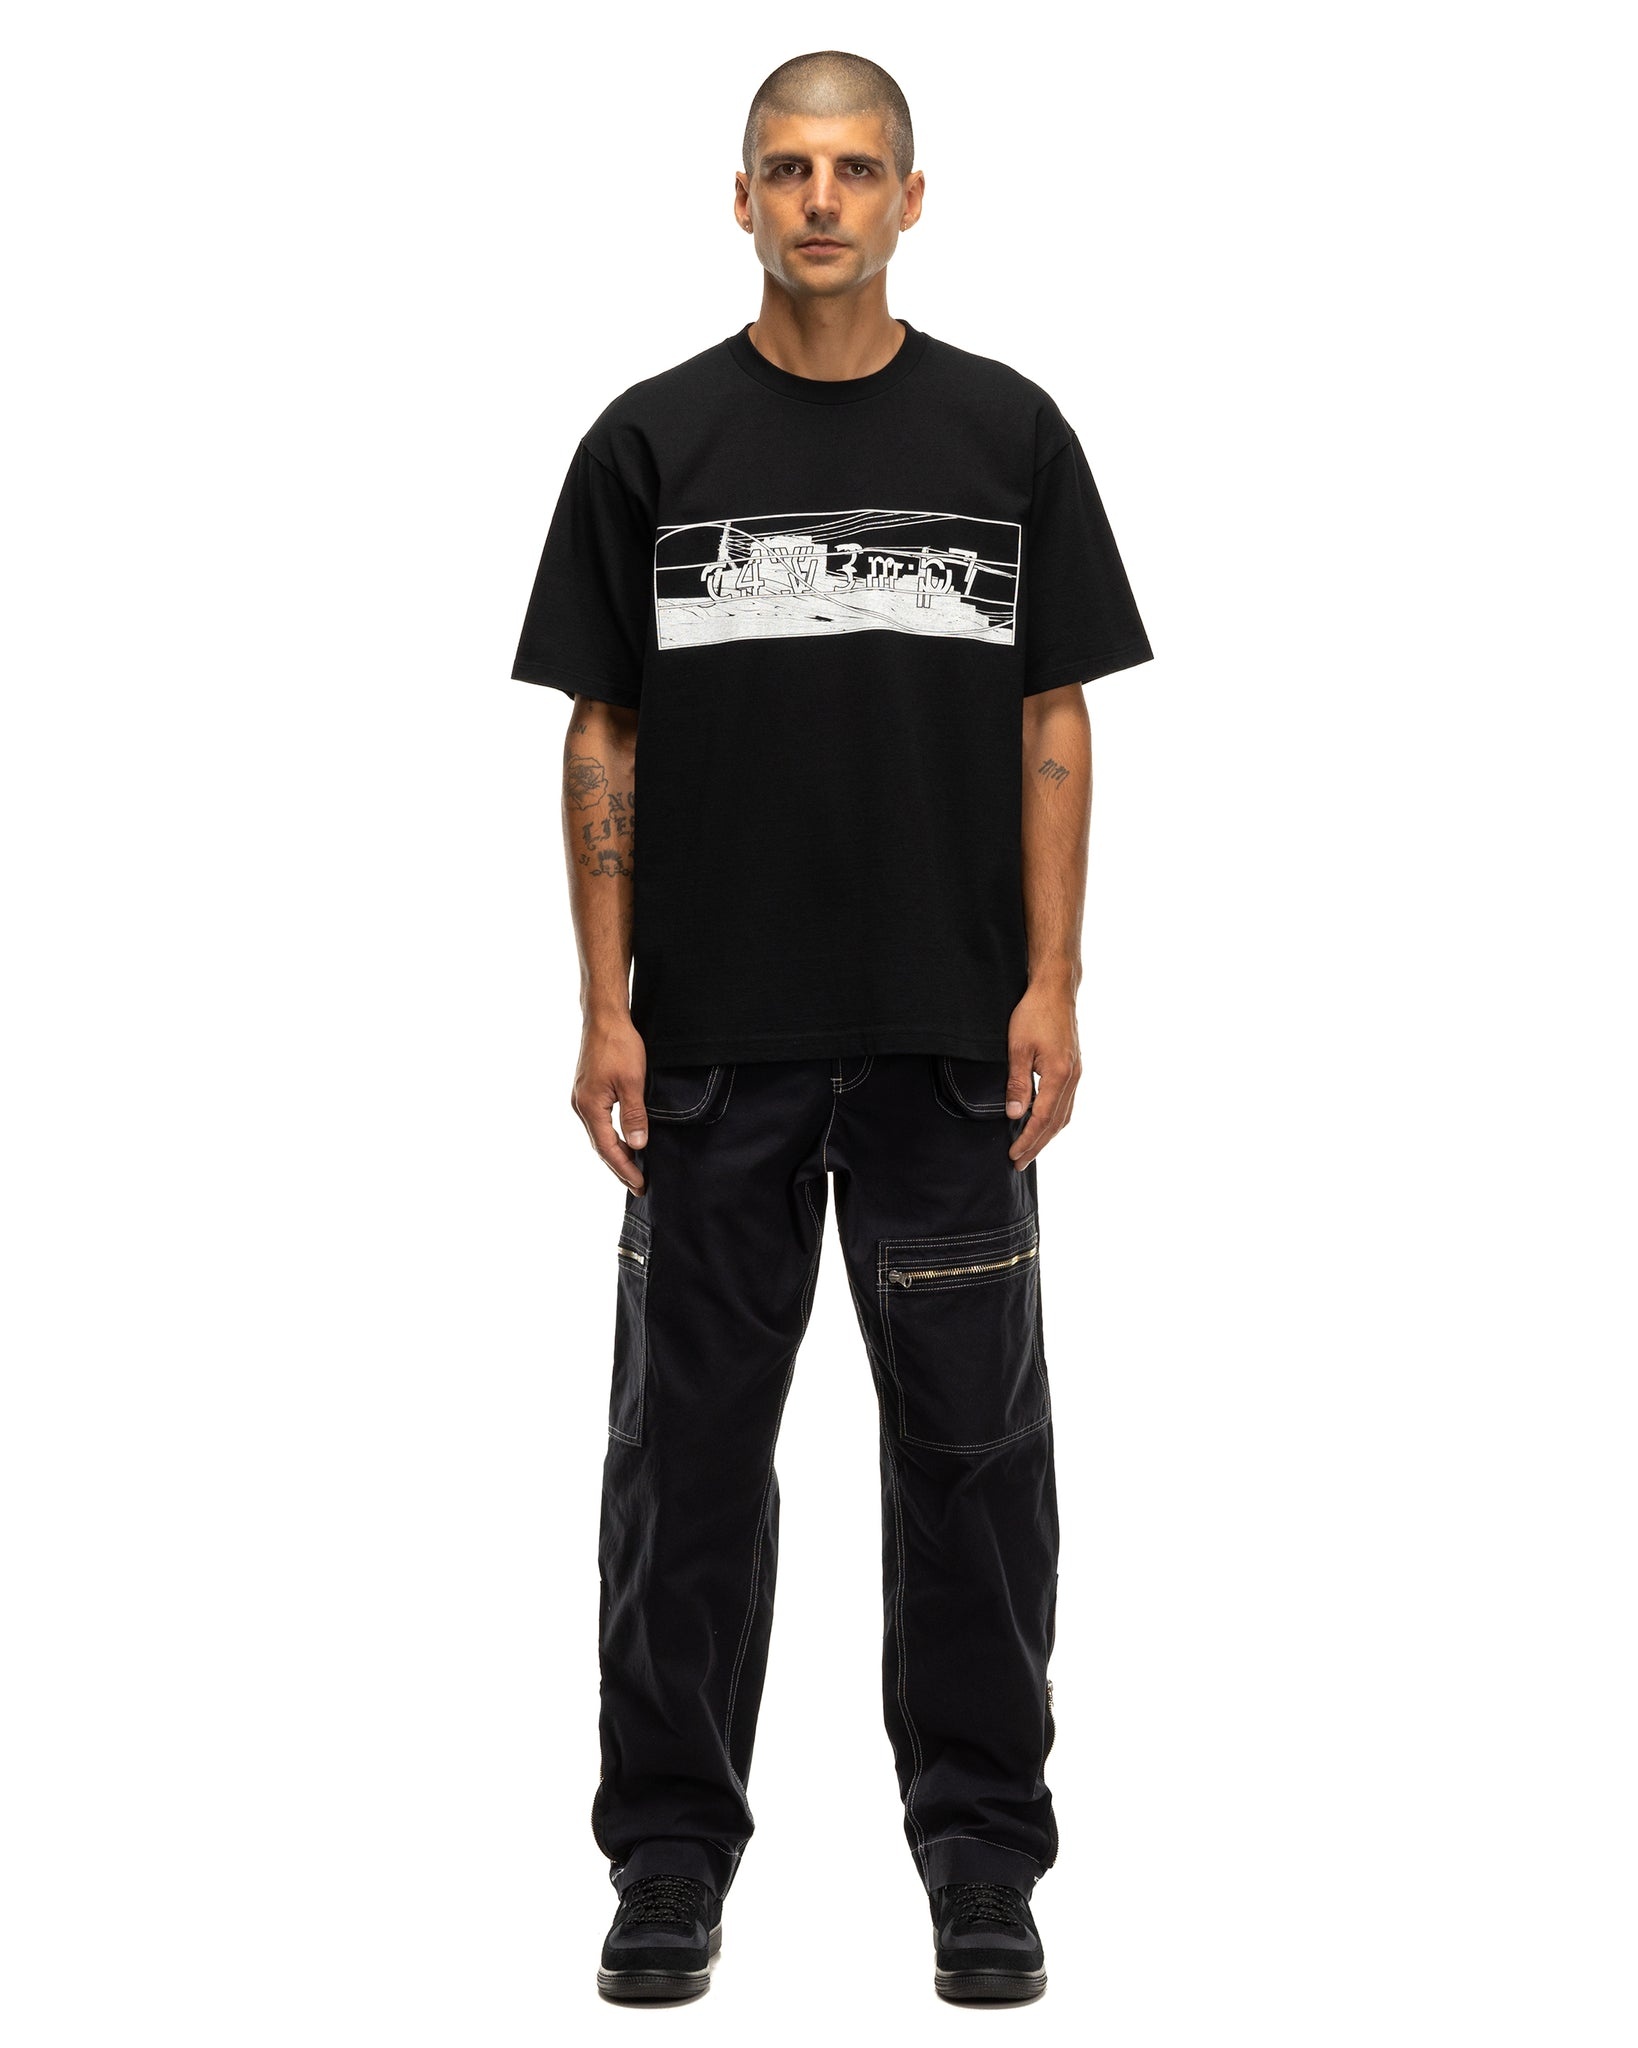 MARKS OF THE END T-SHIRT BLACK - 3